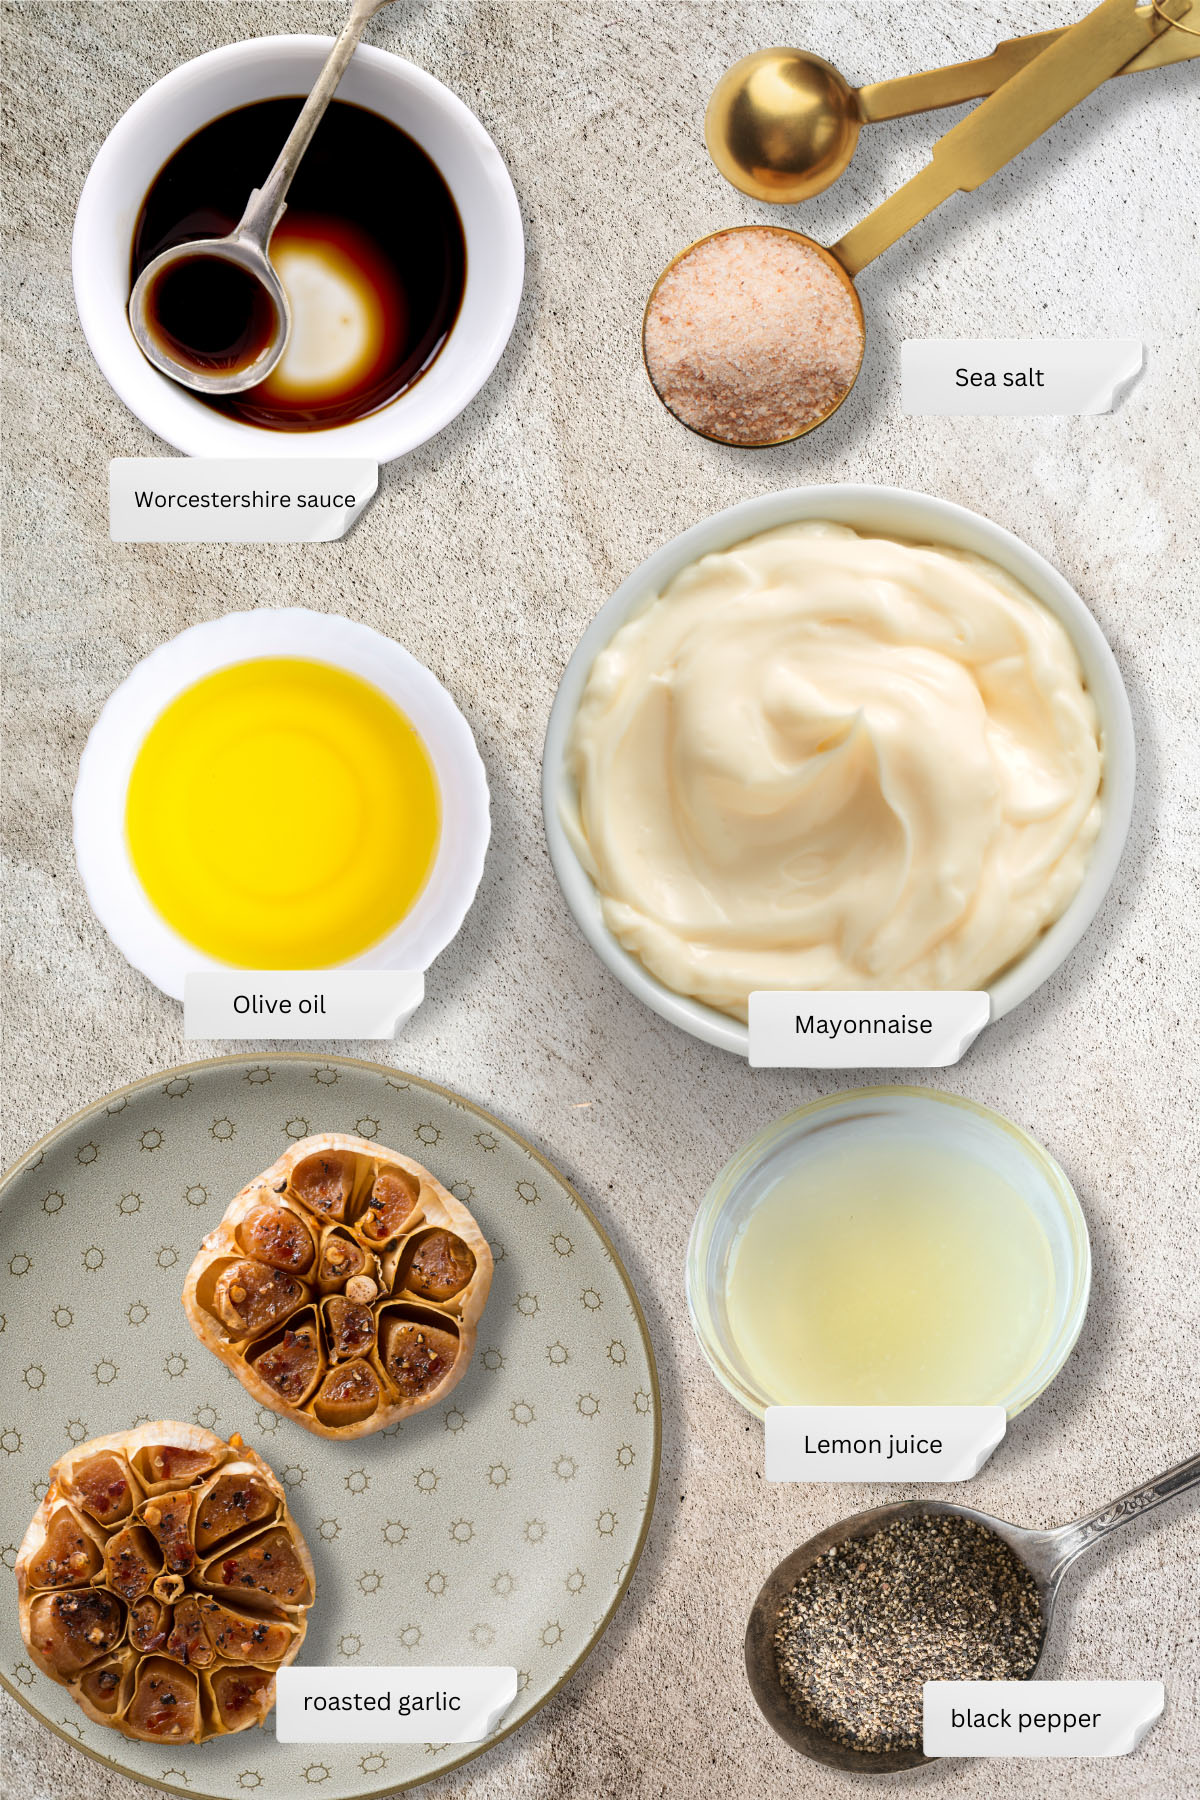 Roasted garlic, olive oil, lemon, mayonnaise – the simple ingredients for delicious Roasted Garlic Aioli.